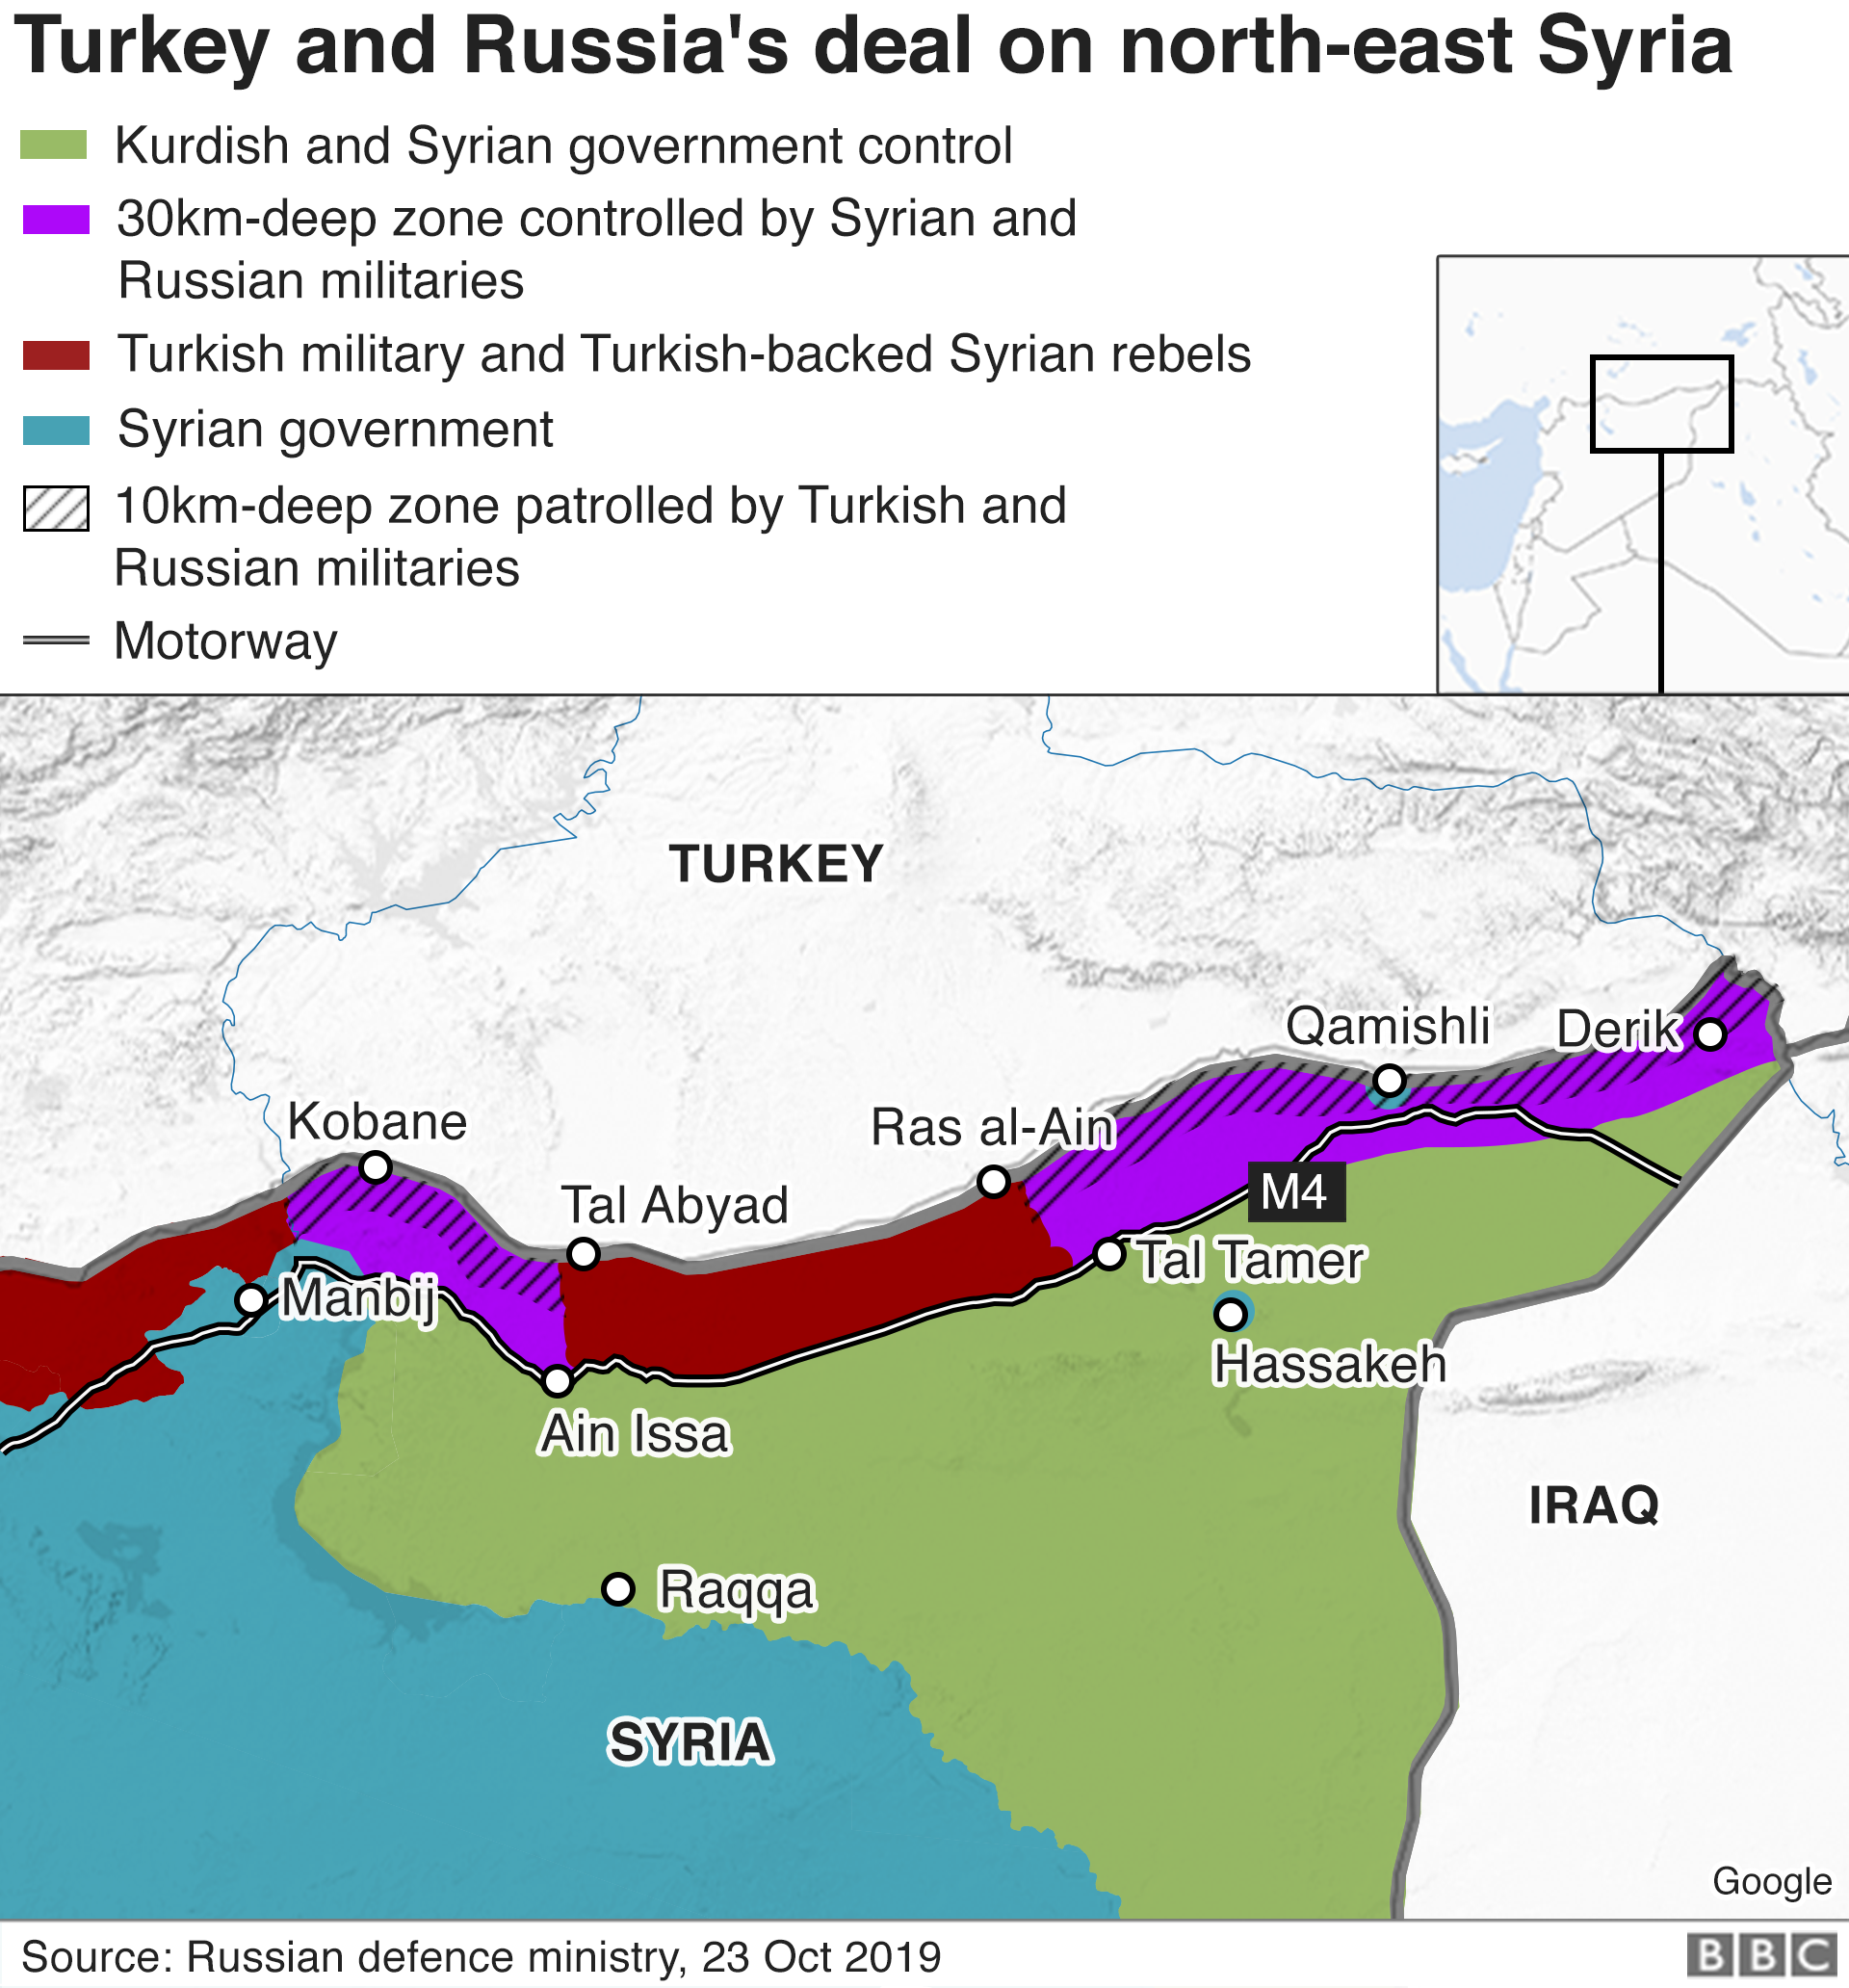 Map showing Turkey and Russia's deal on north-east Syria (23 October 2019)